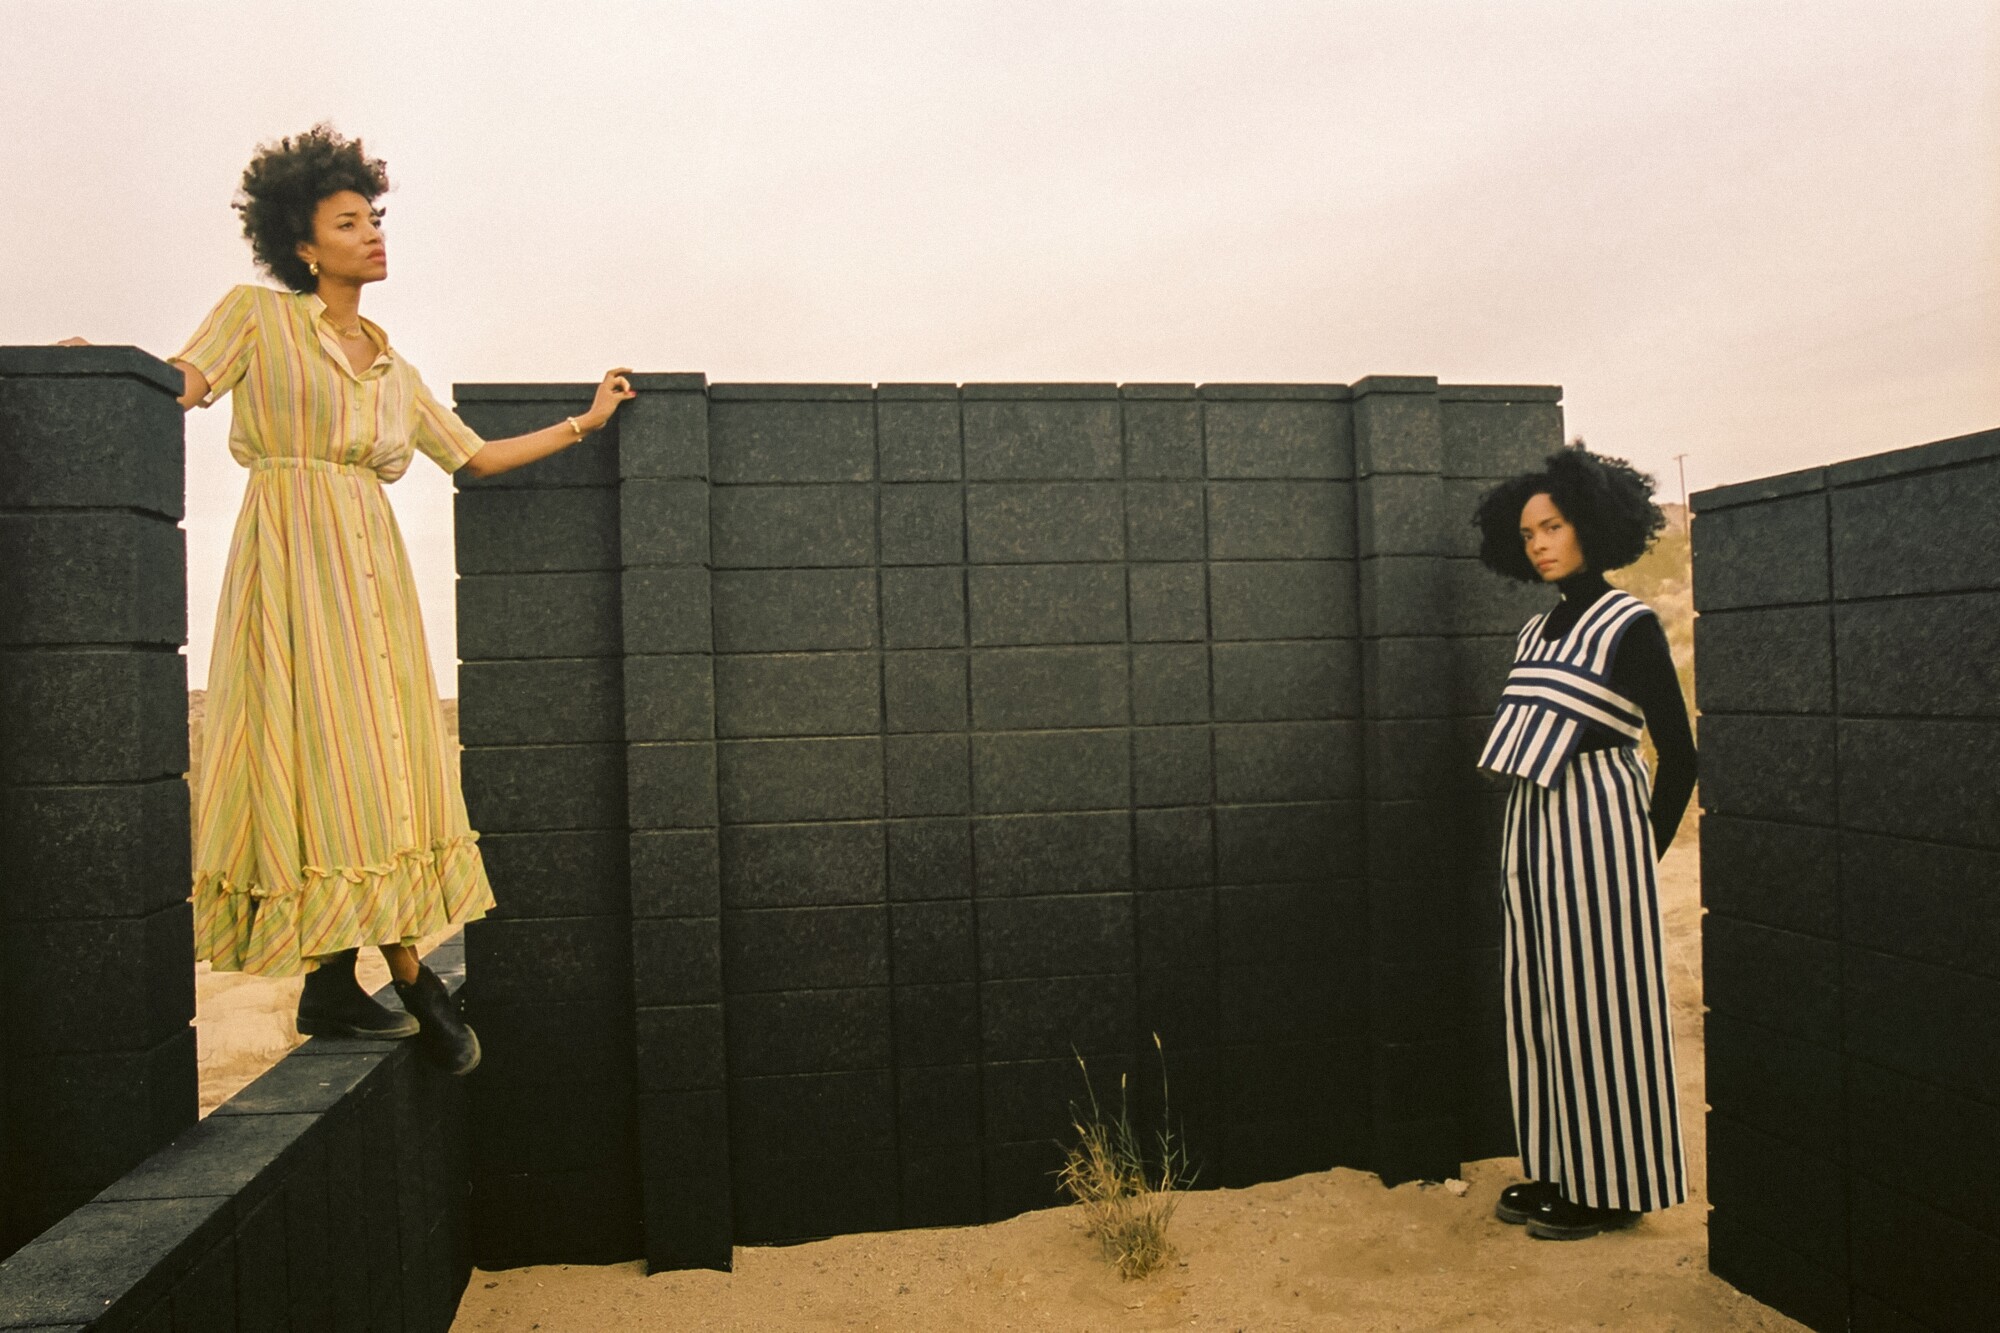 Two women stand amid black cinderblock walls in the desert.